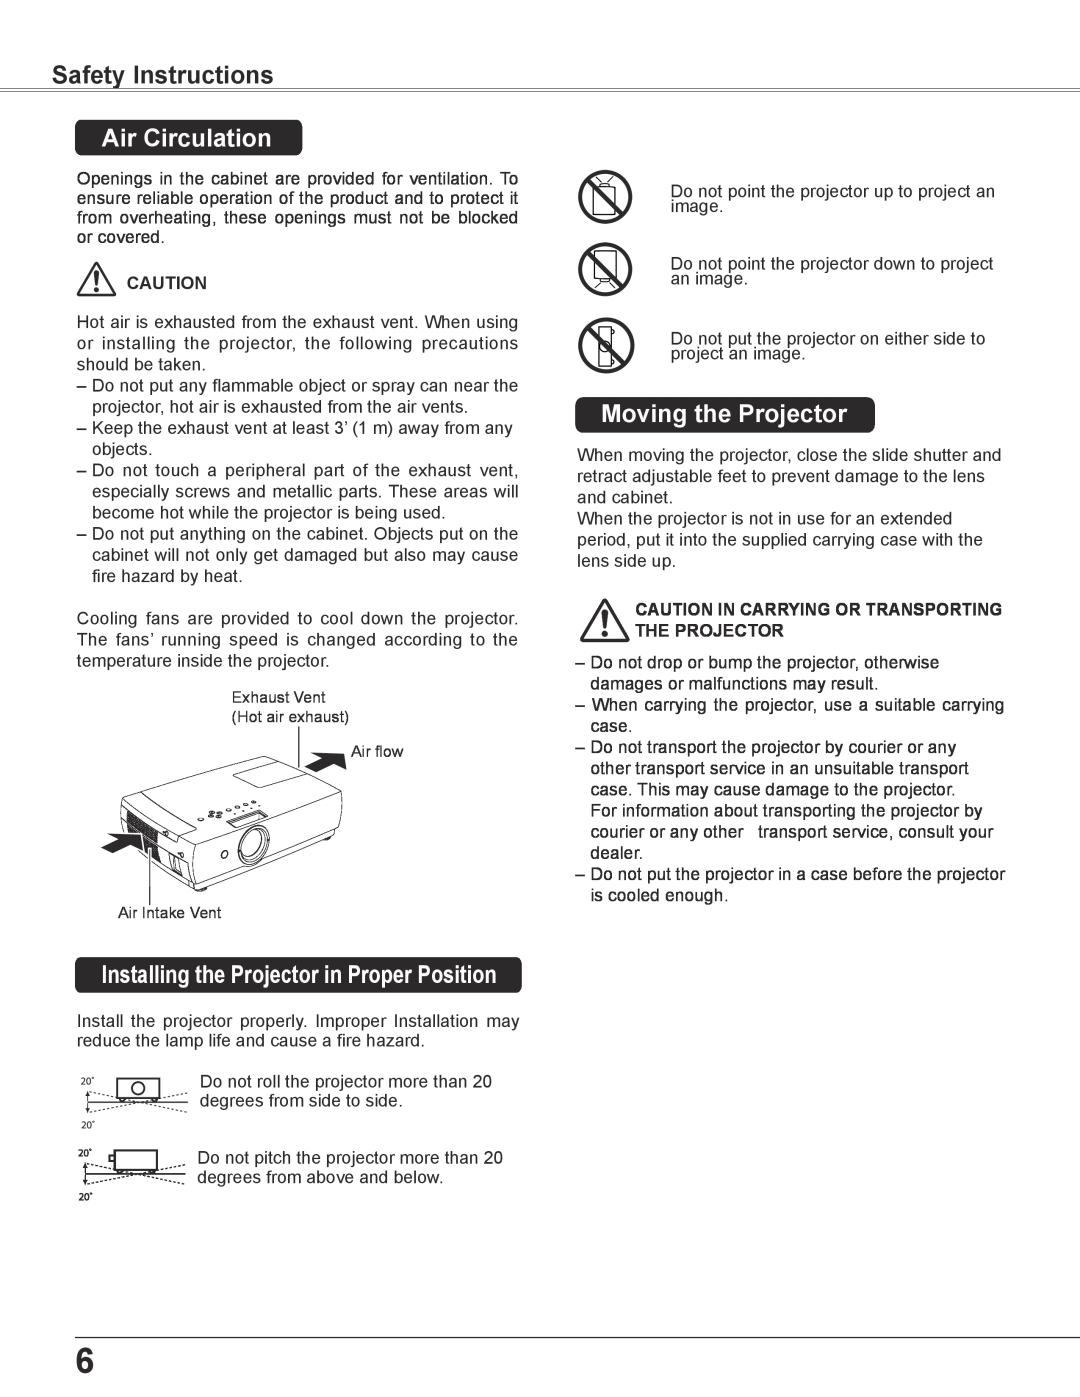 Sanyo PLC-XC56 Safety Instructions, Air Circulation, Moving the Projector, Installing the Projector in Proper Position 